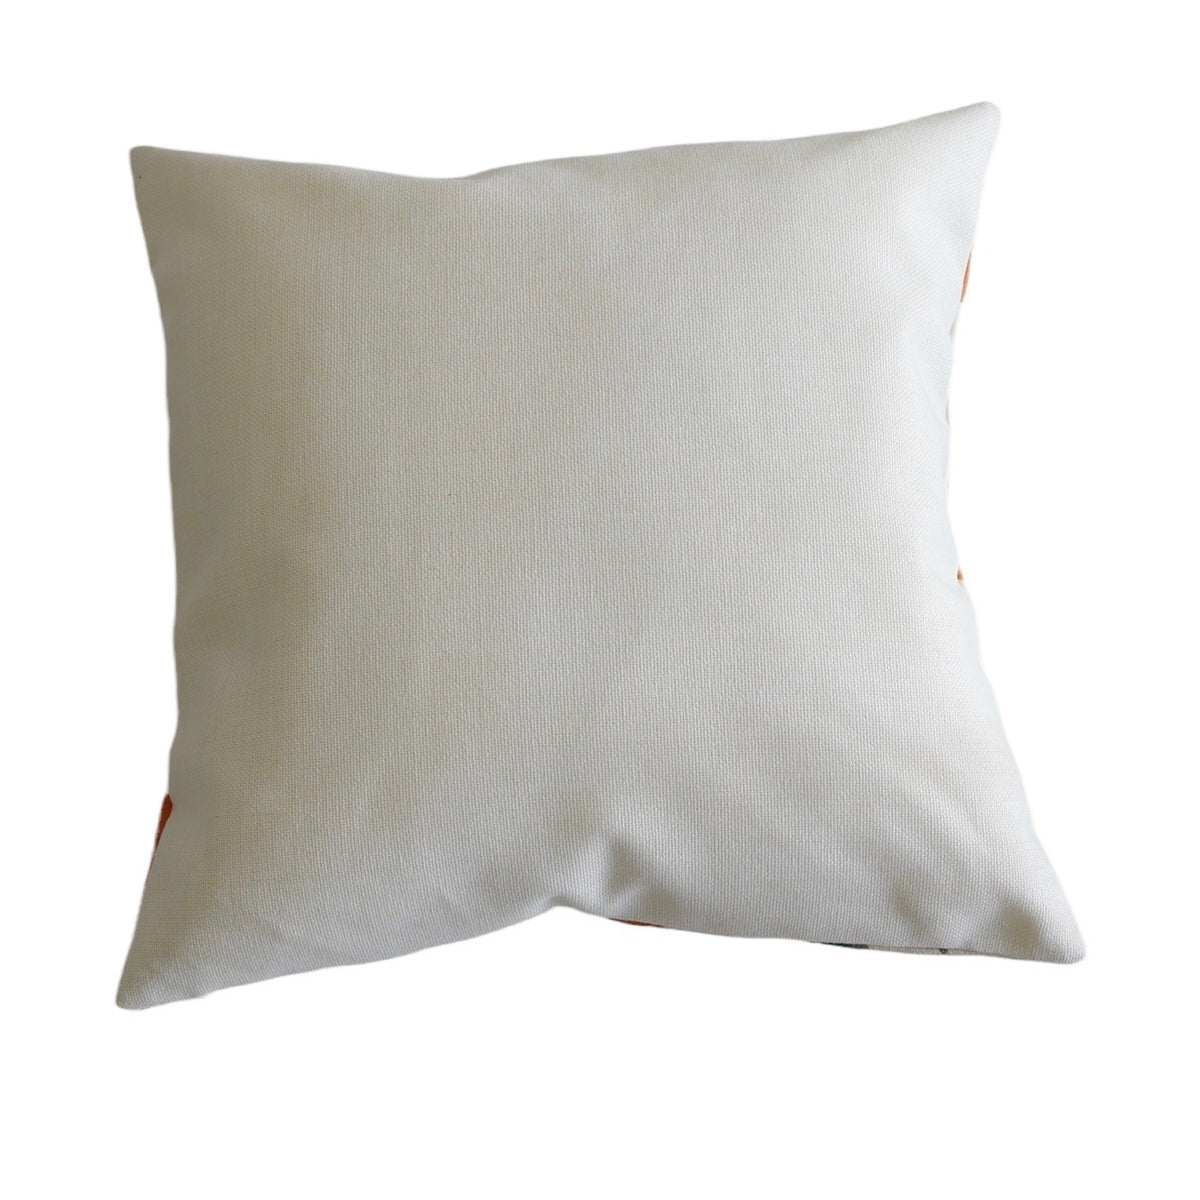 Show Me Your Spots Outdoor Throw Pillow Cover - Holistic Habitat 